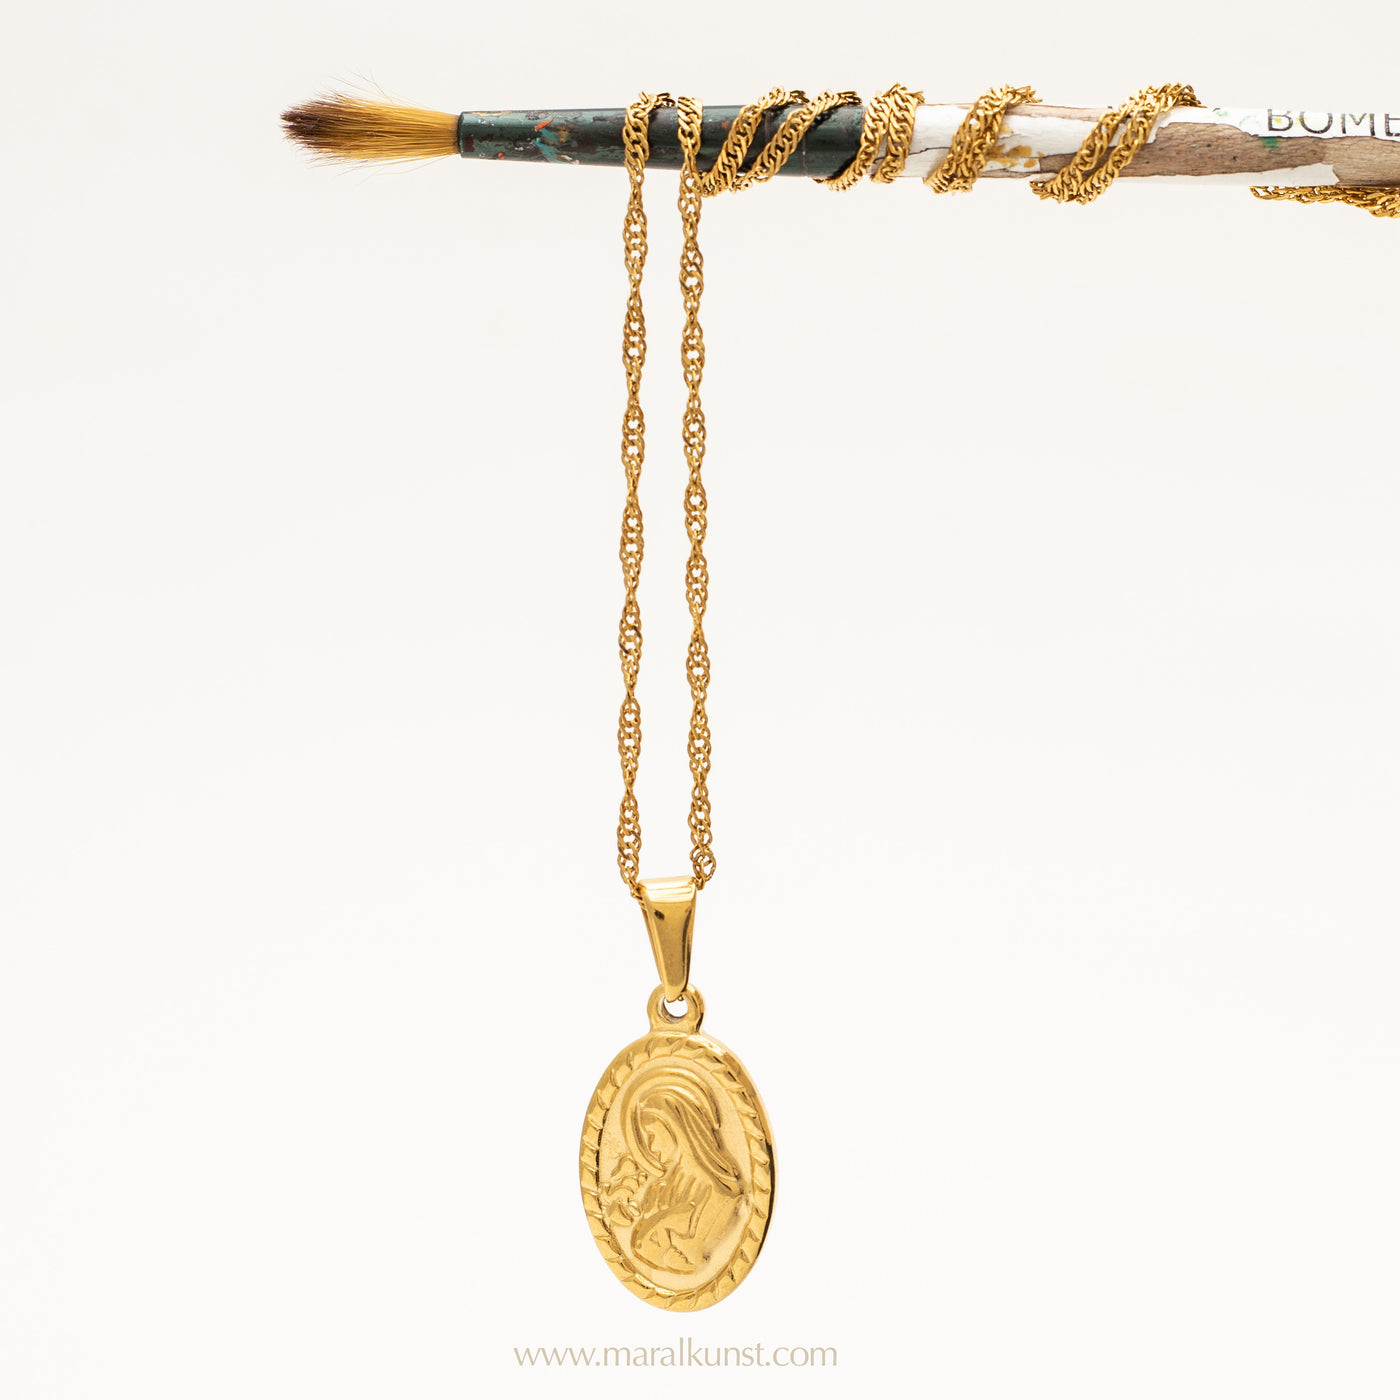 Mary and Jesus necklace